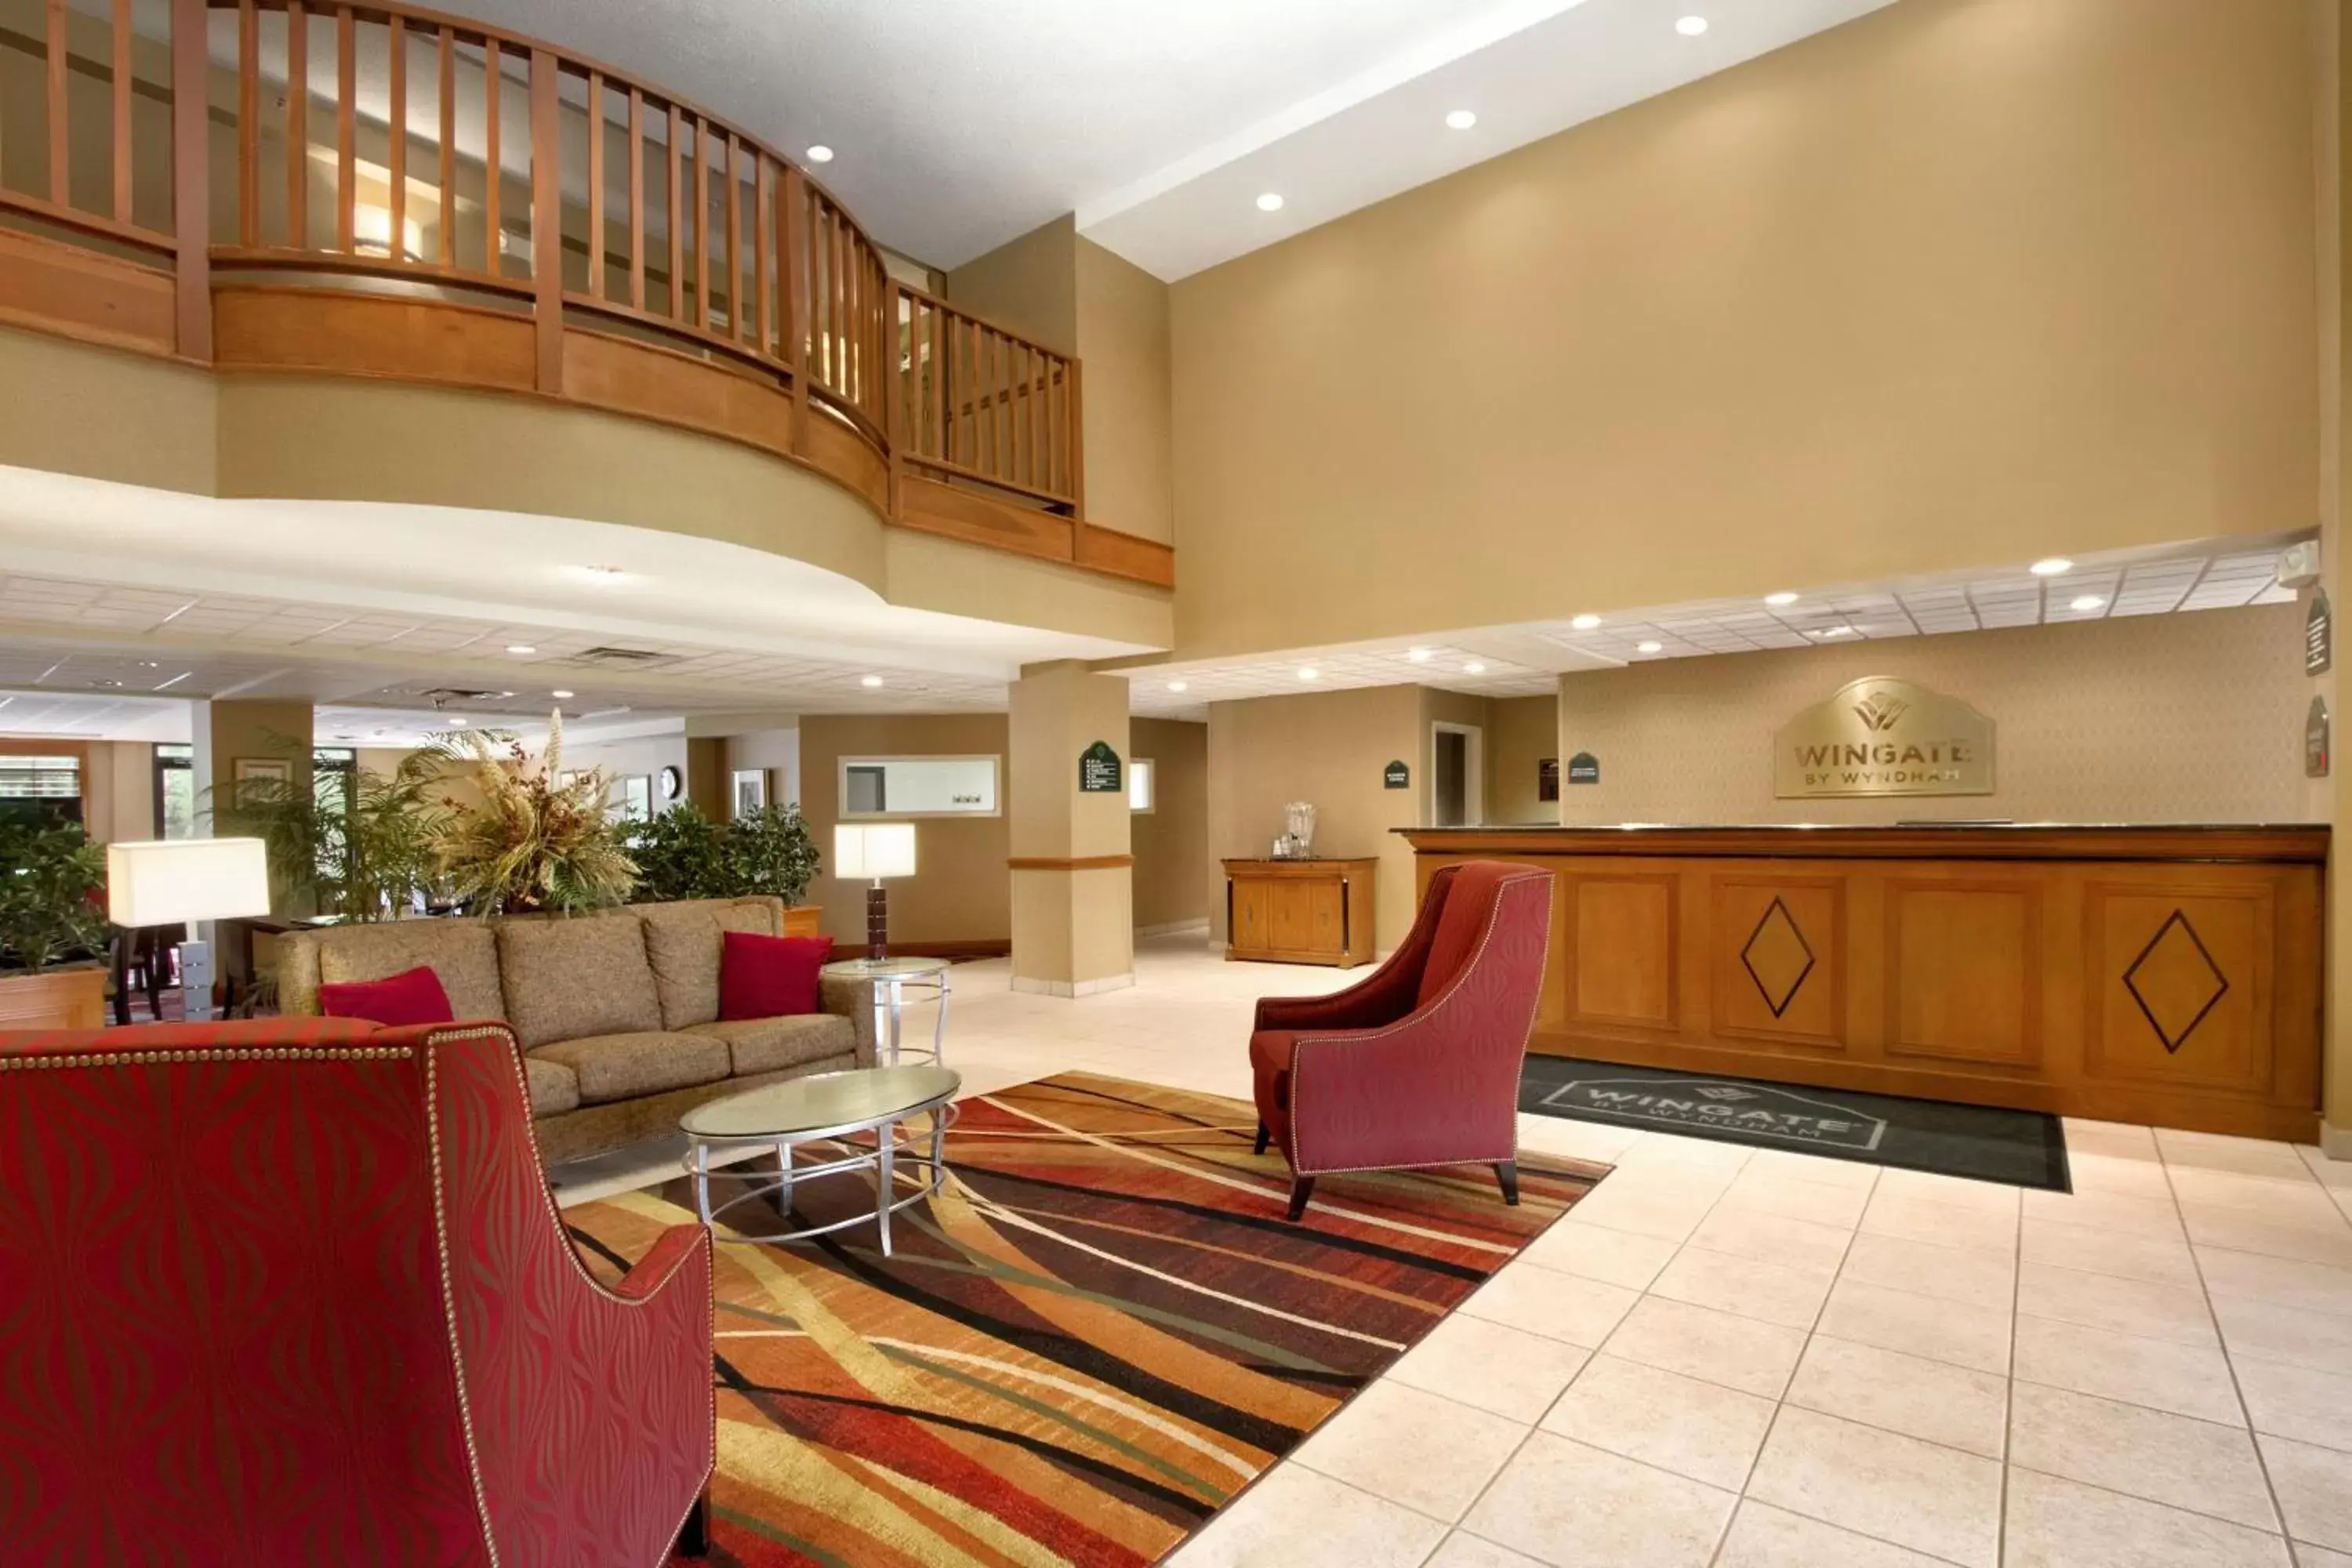 Lobby or reception in Wingate by Wyndham - Chattanooga